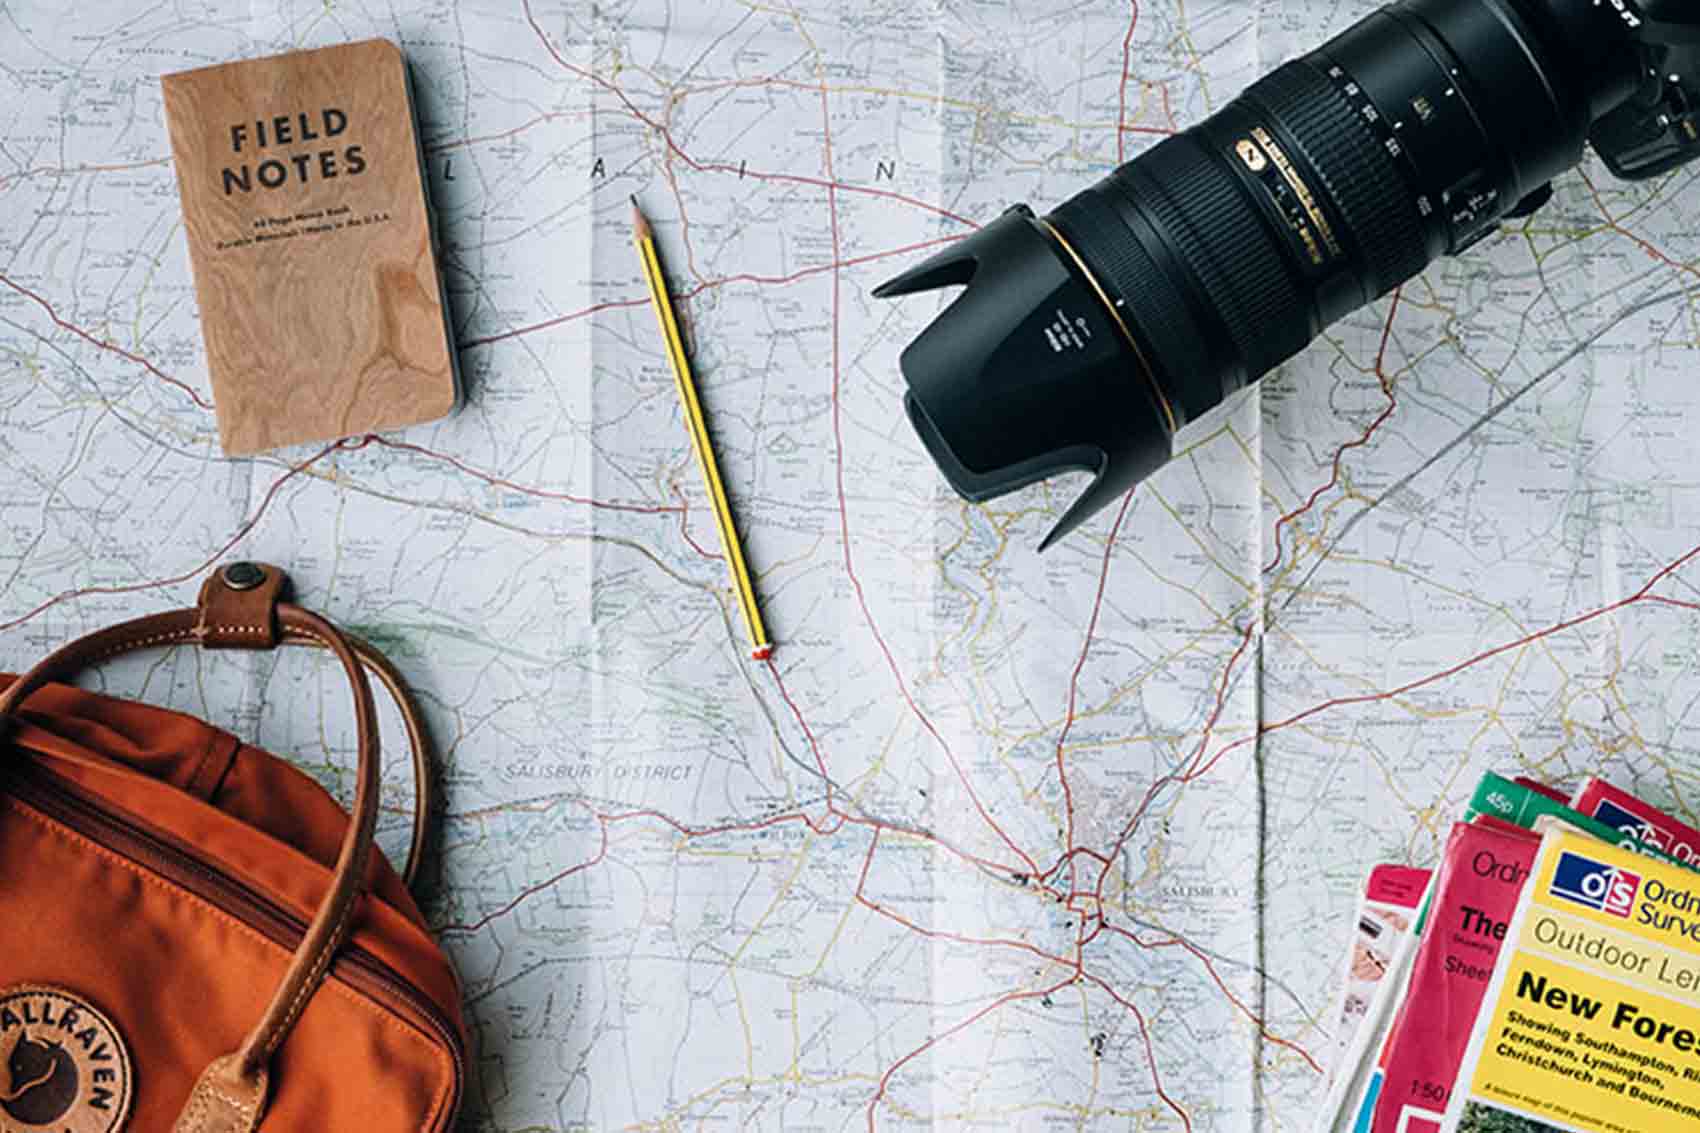 Camera and other travel items on top of map